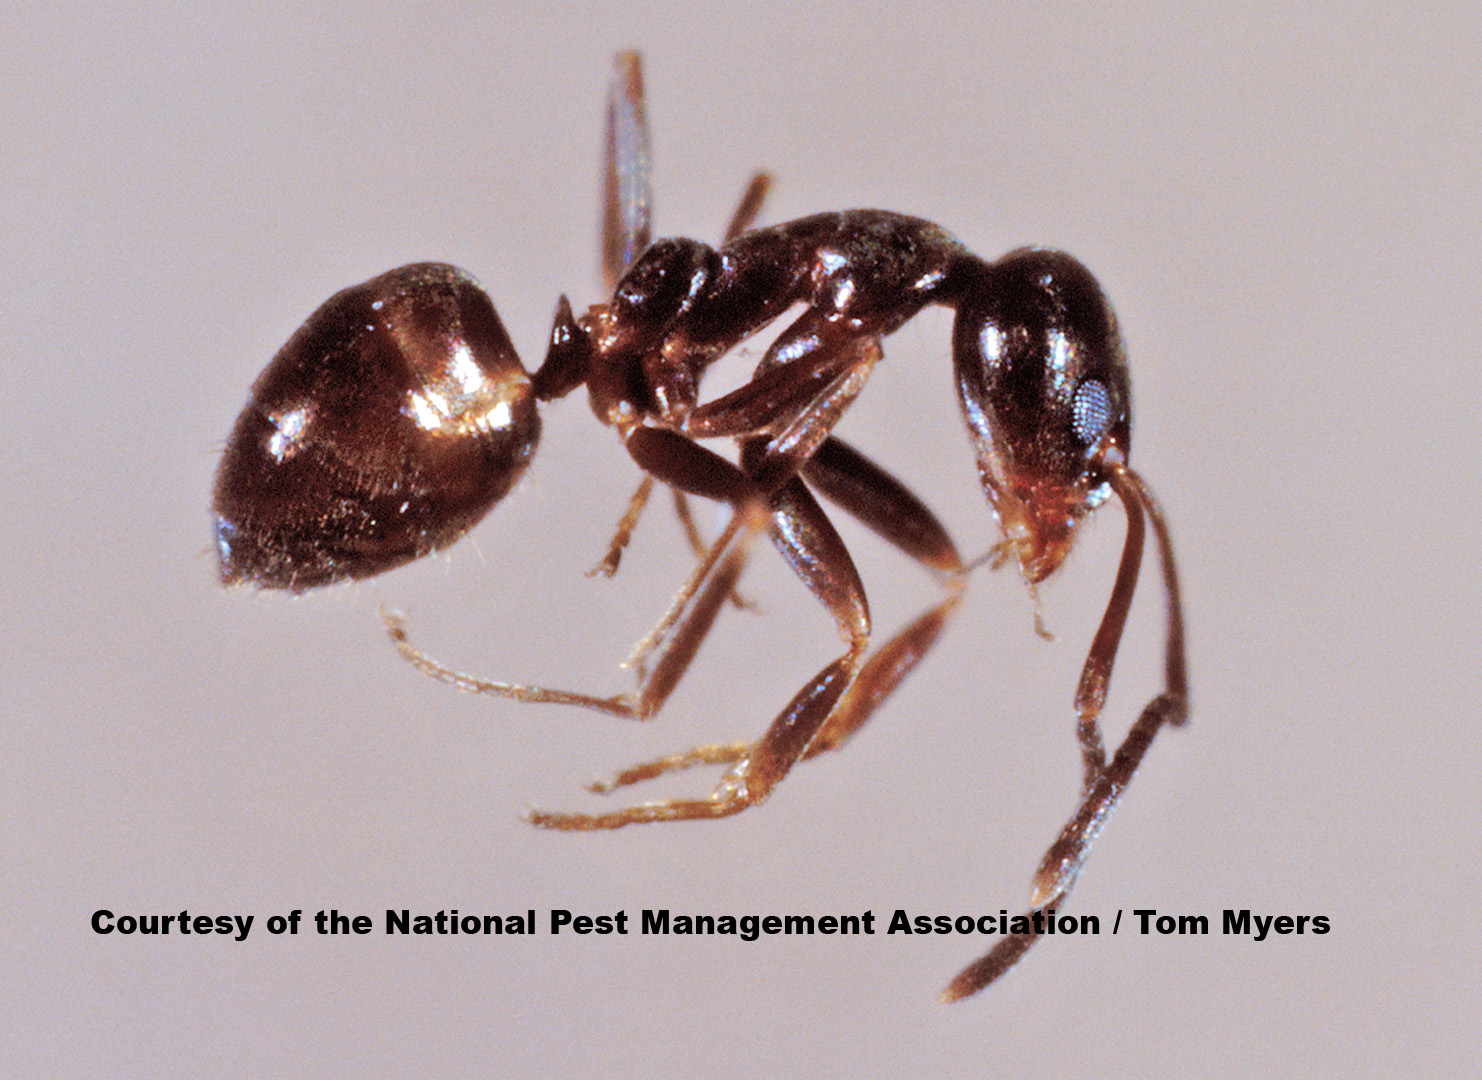 Argentine Ant Information - Fun Ant Facts from PestWorld for Kids